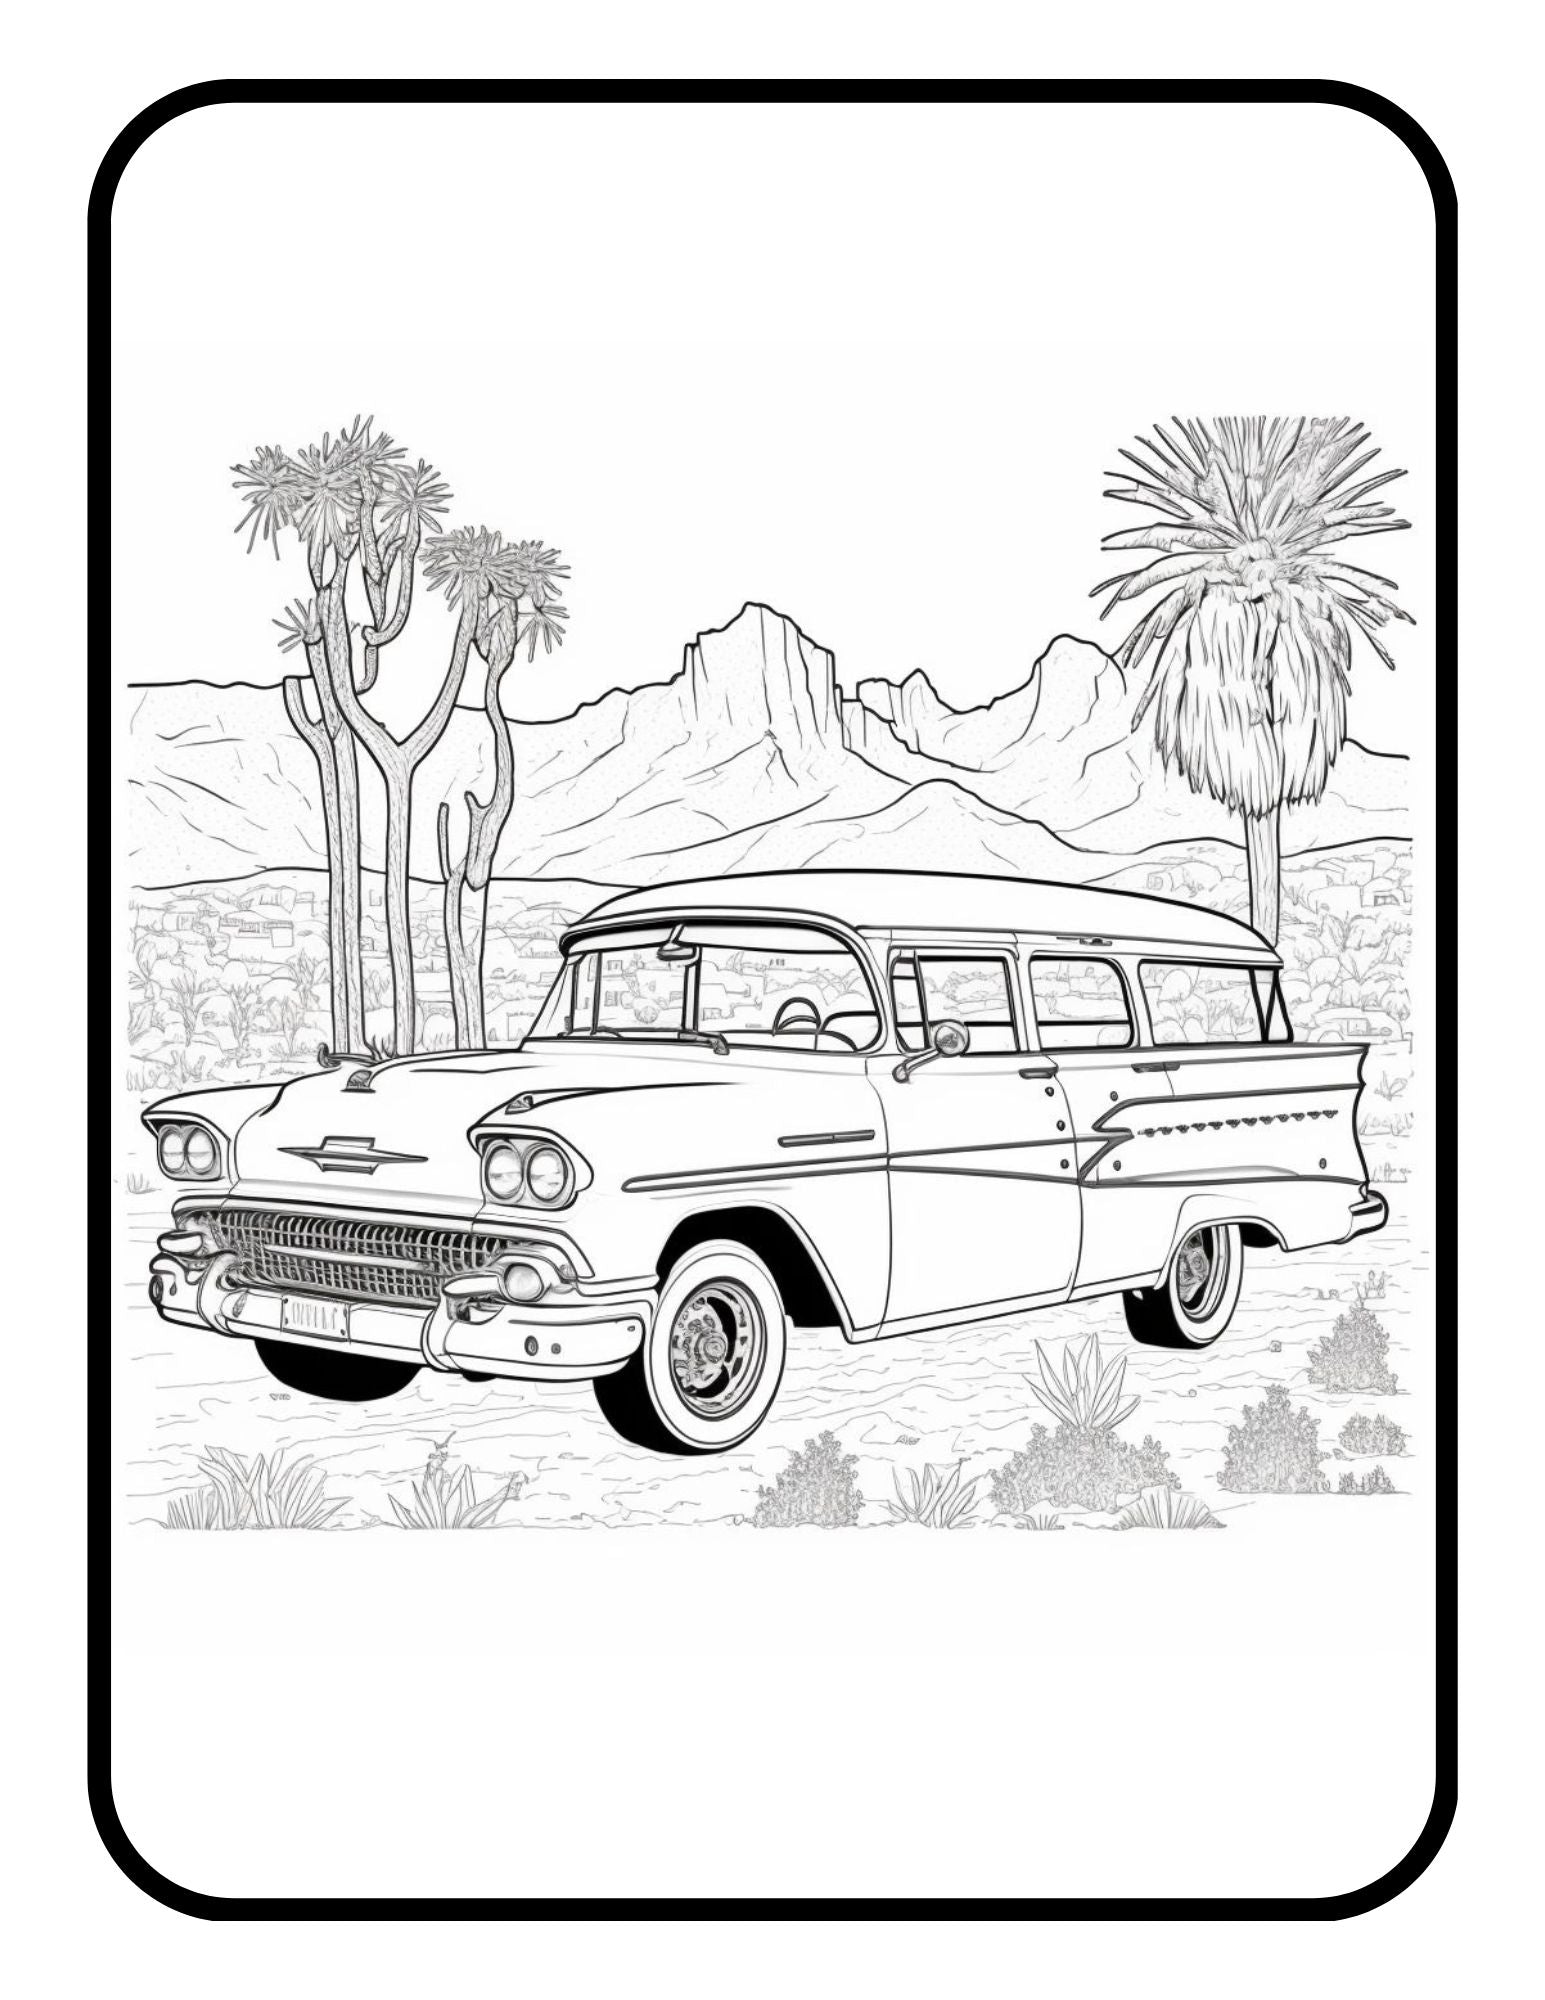 Vintage classic old enthusiast car coloring book exotic race car for m â mode art design